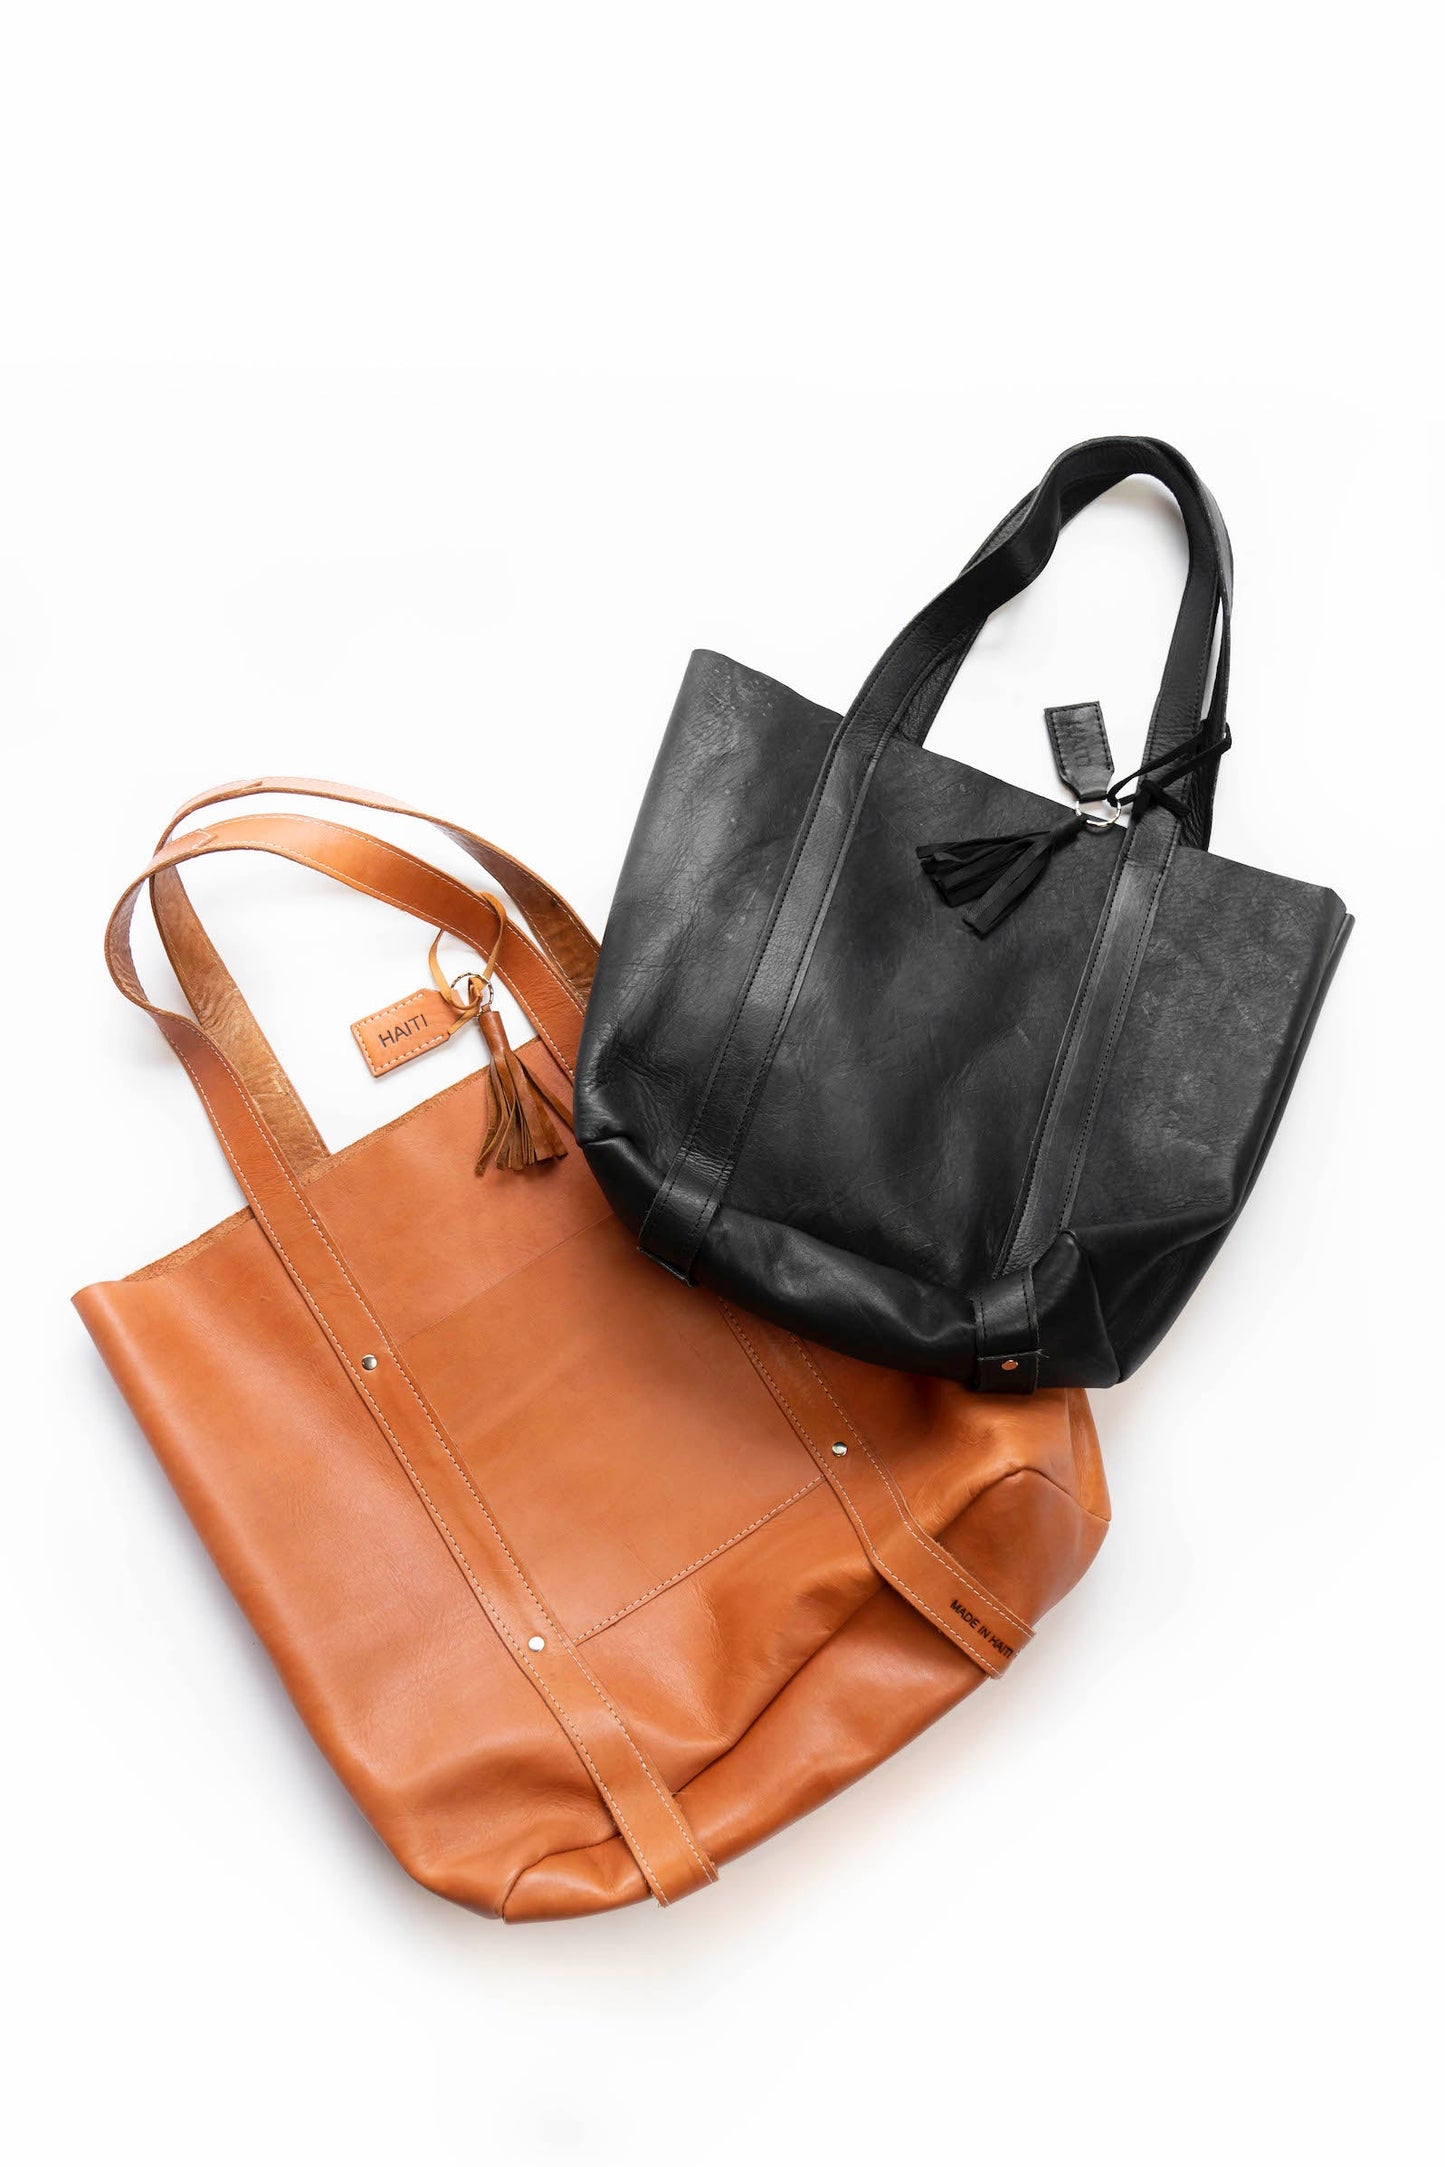 
                  
                    XL Raw Leather Tote by 2nd Story Goods
                  
                